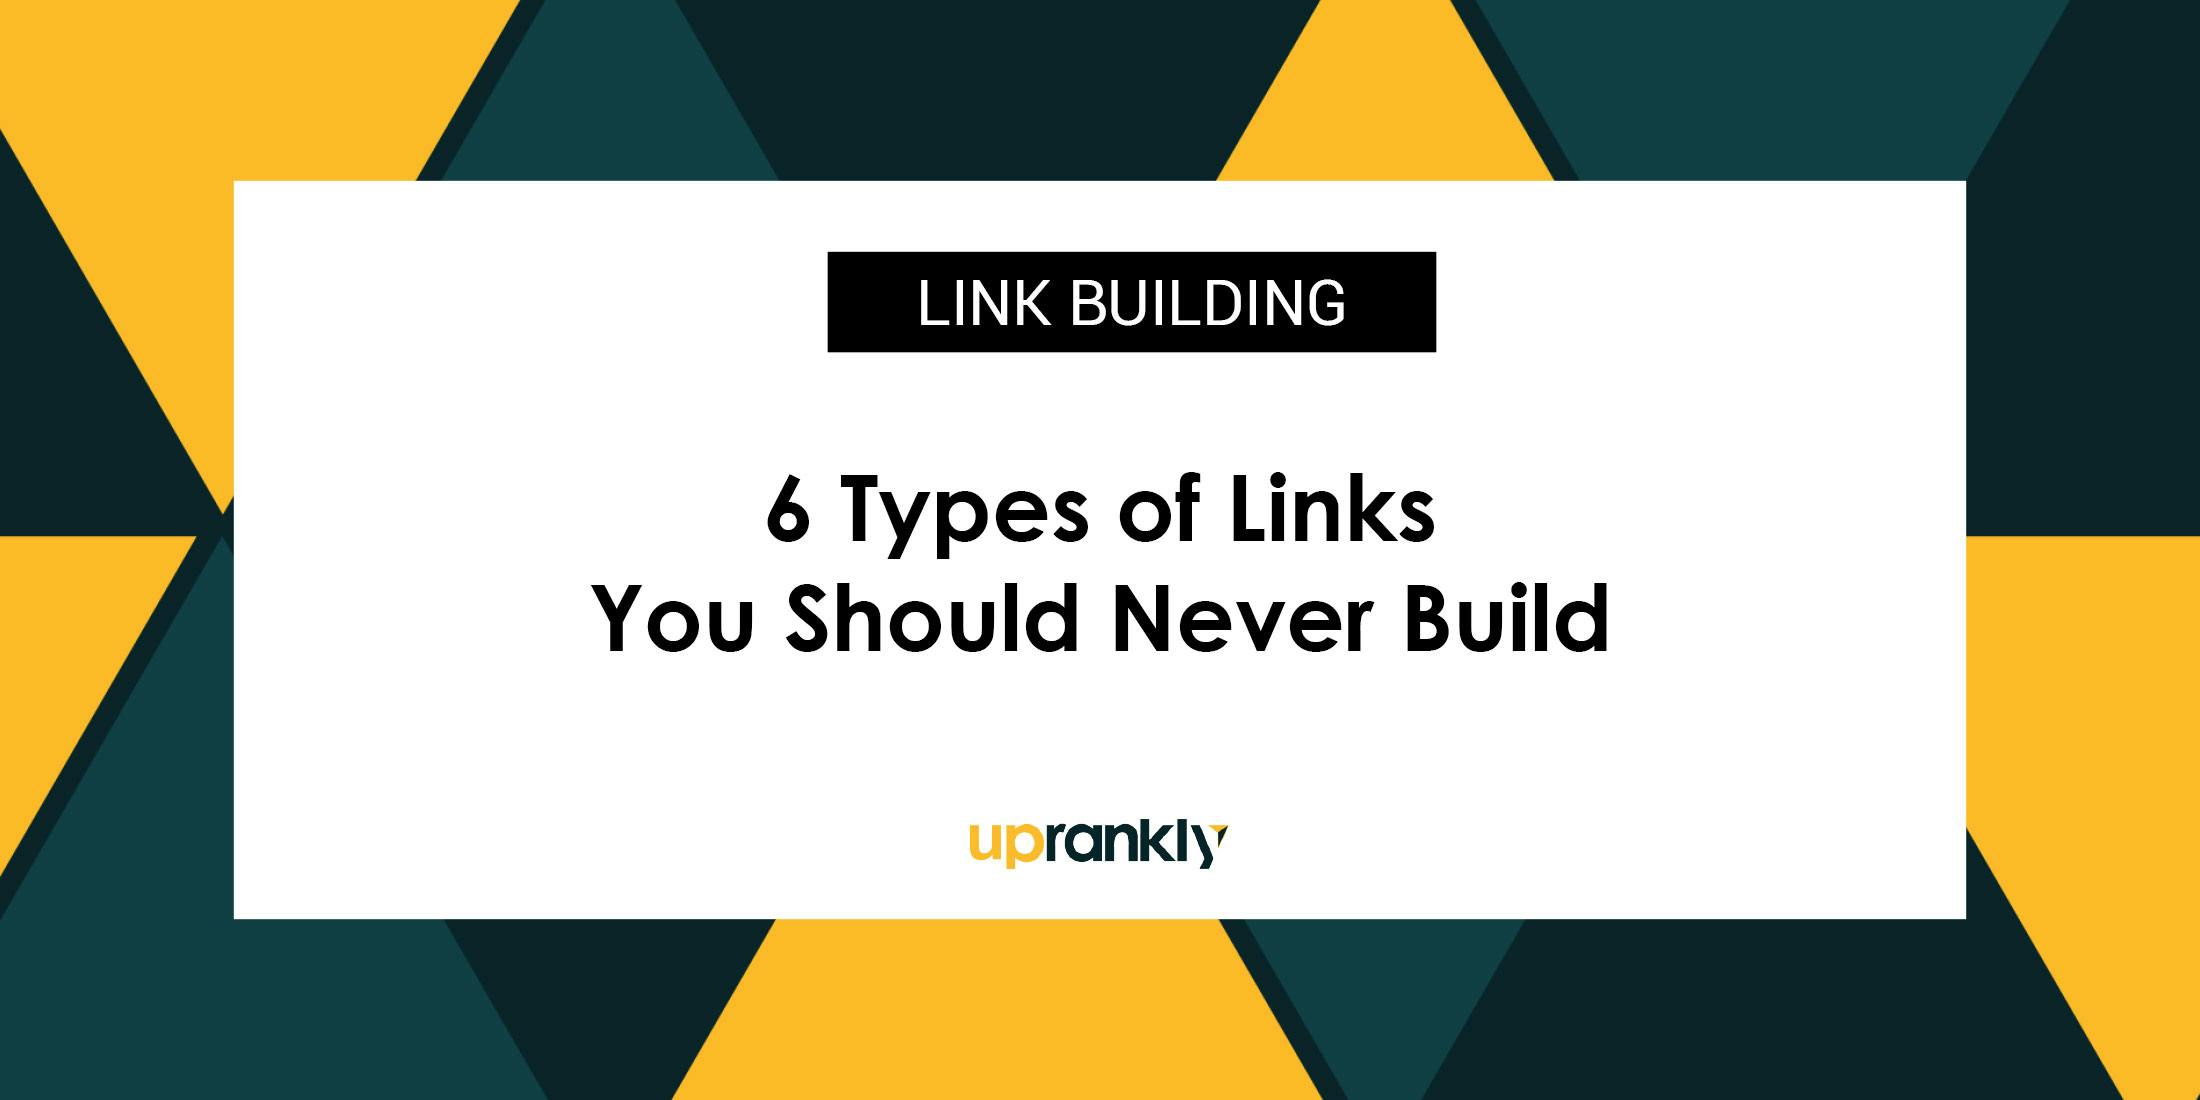 6 Types of Links You Should Never Build